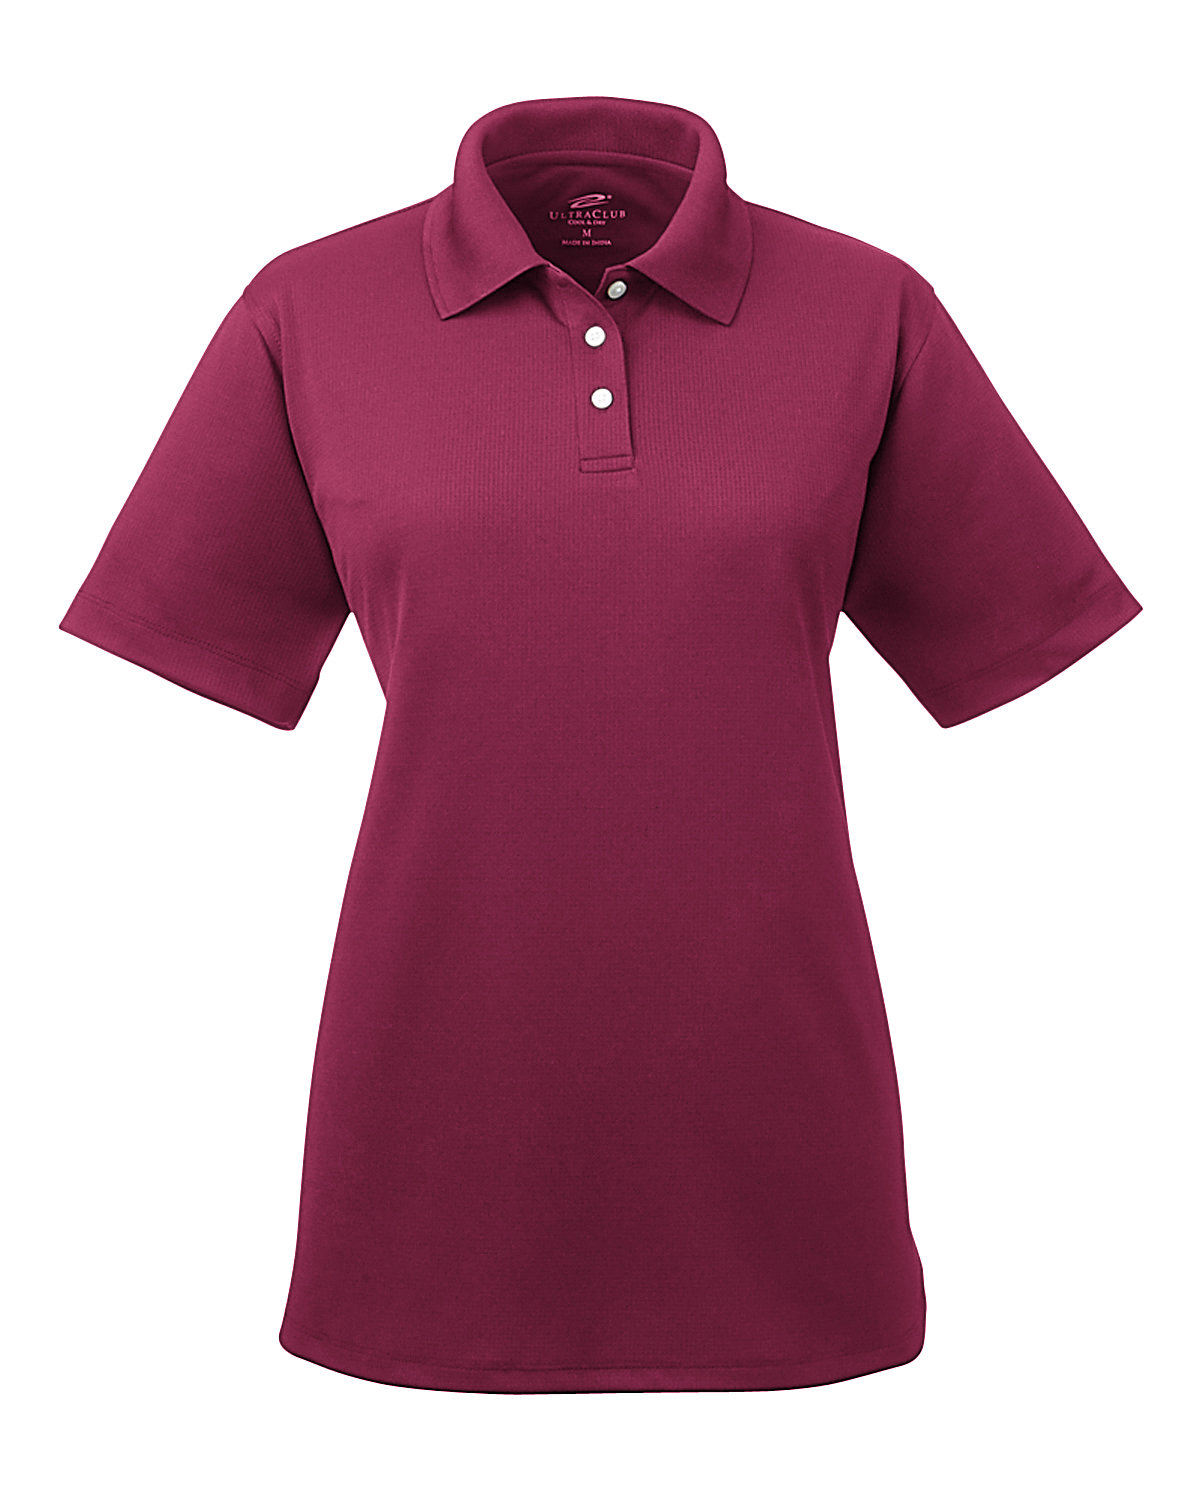 UltraClub Ladies Cool & Dry Stain-Release Performance Polo